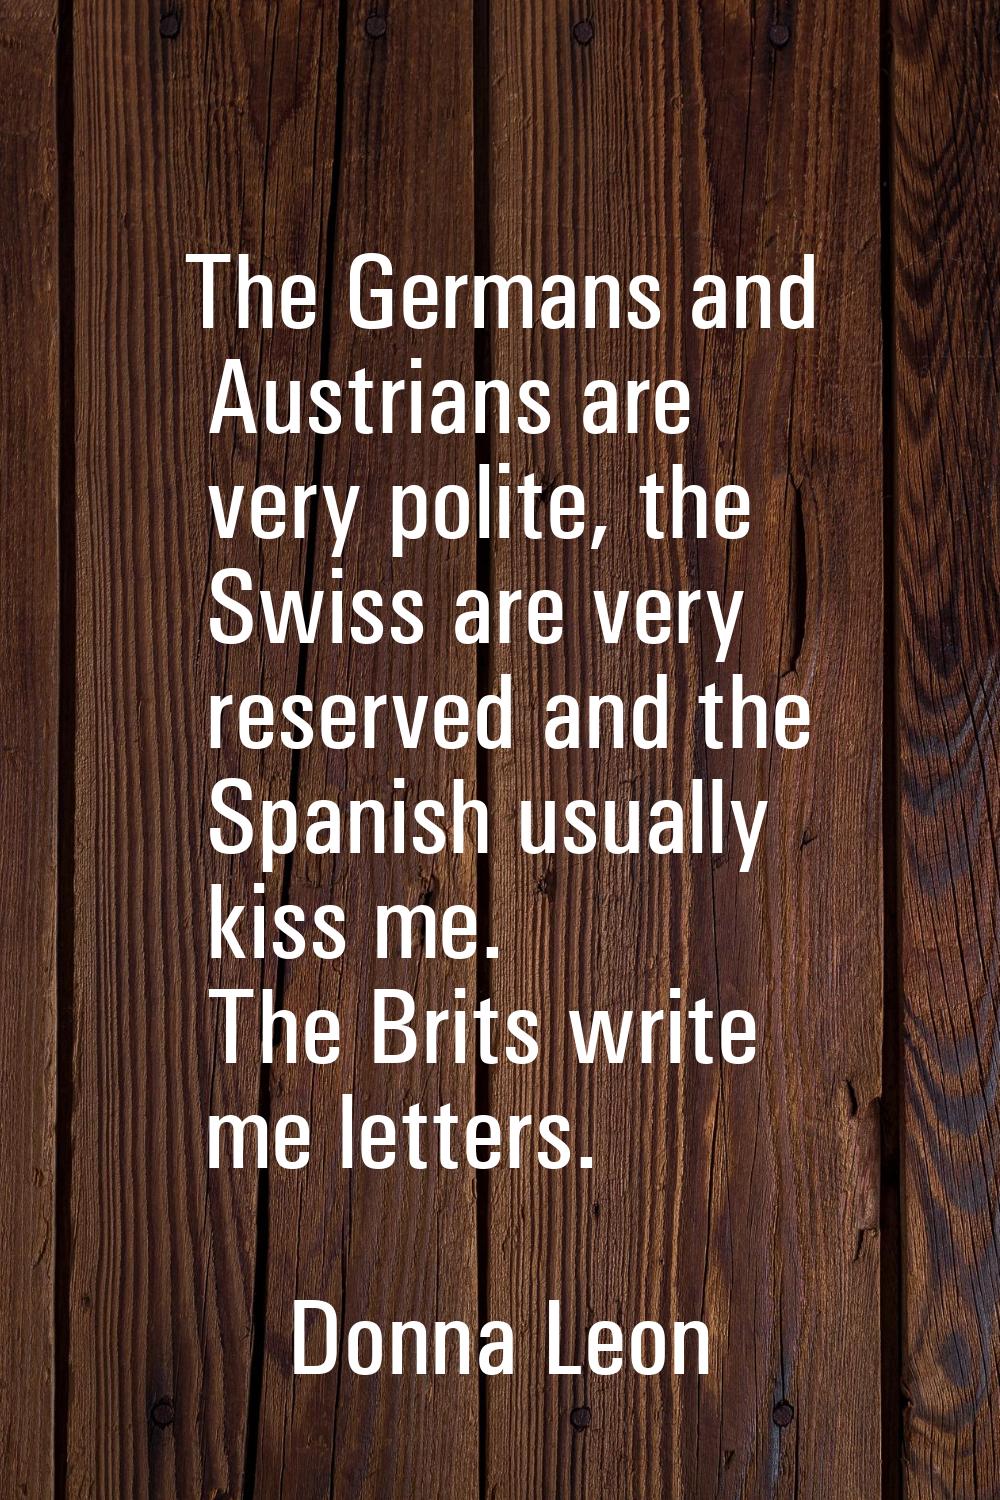 The Germans and Austrians are very polite, the Swiss are very reserved and the Spanish usually kiss